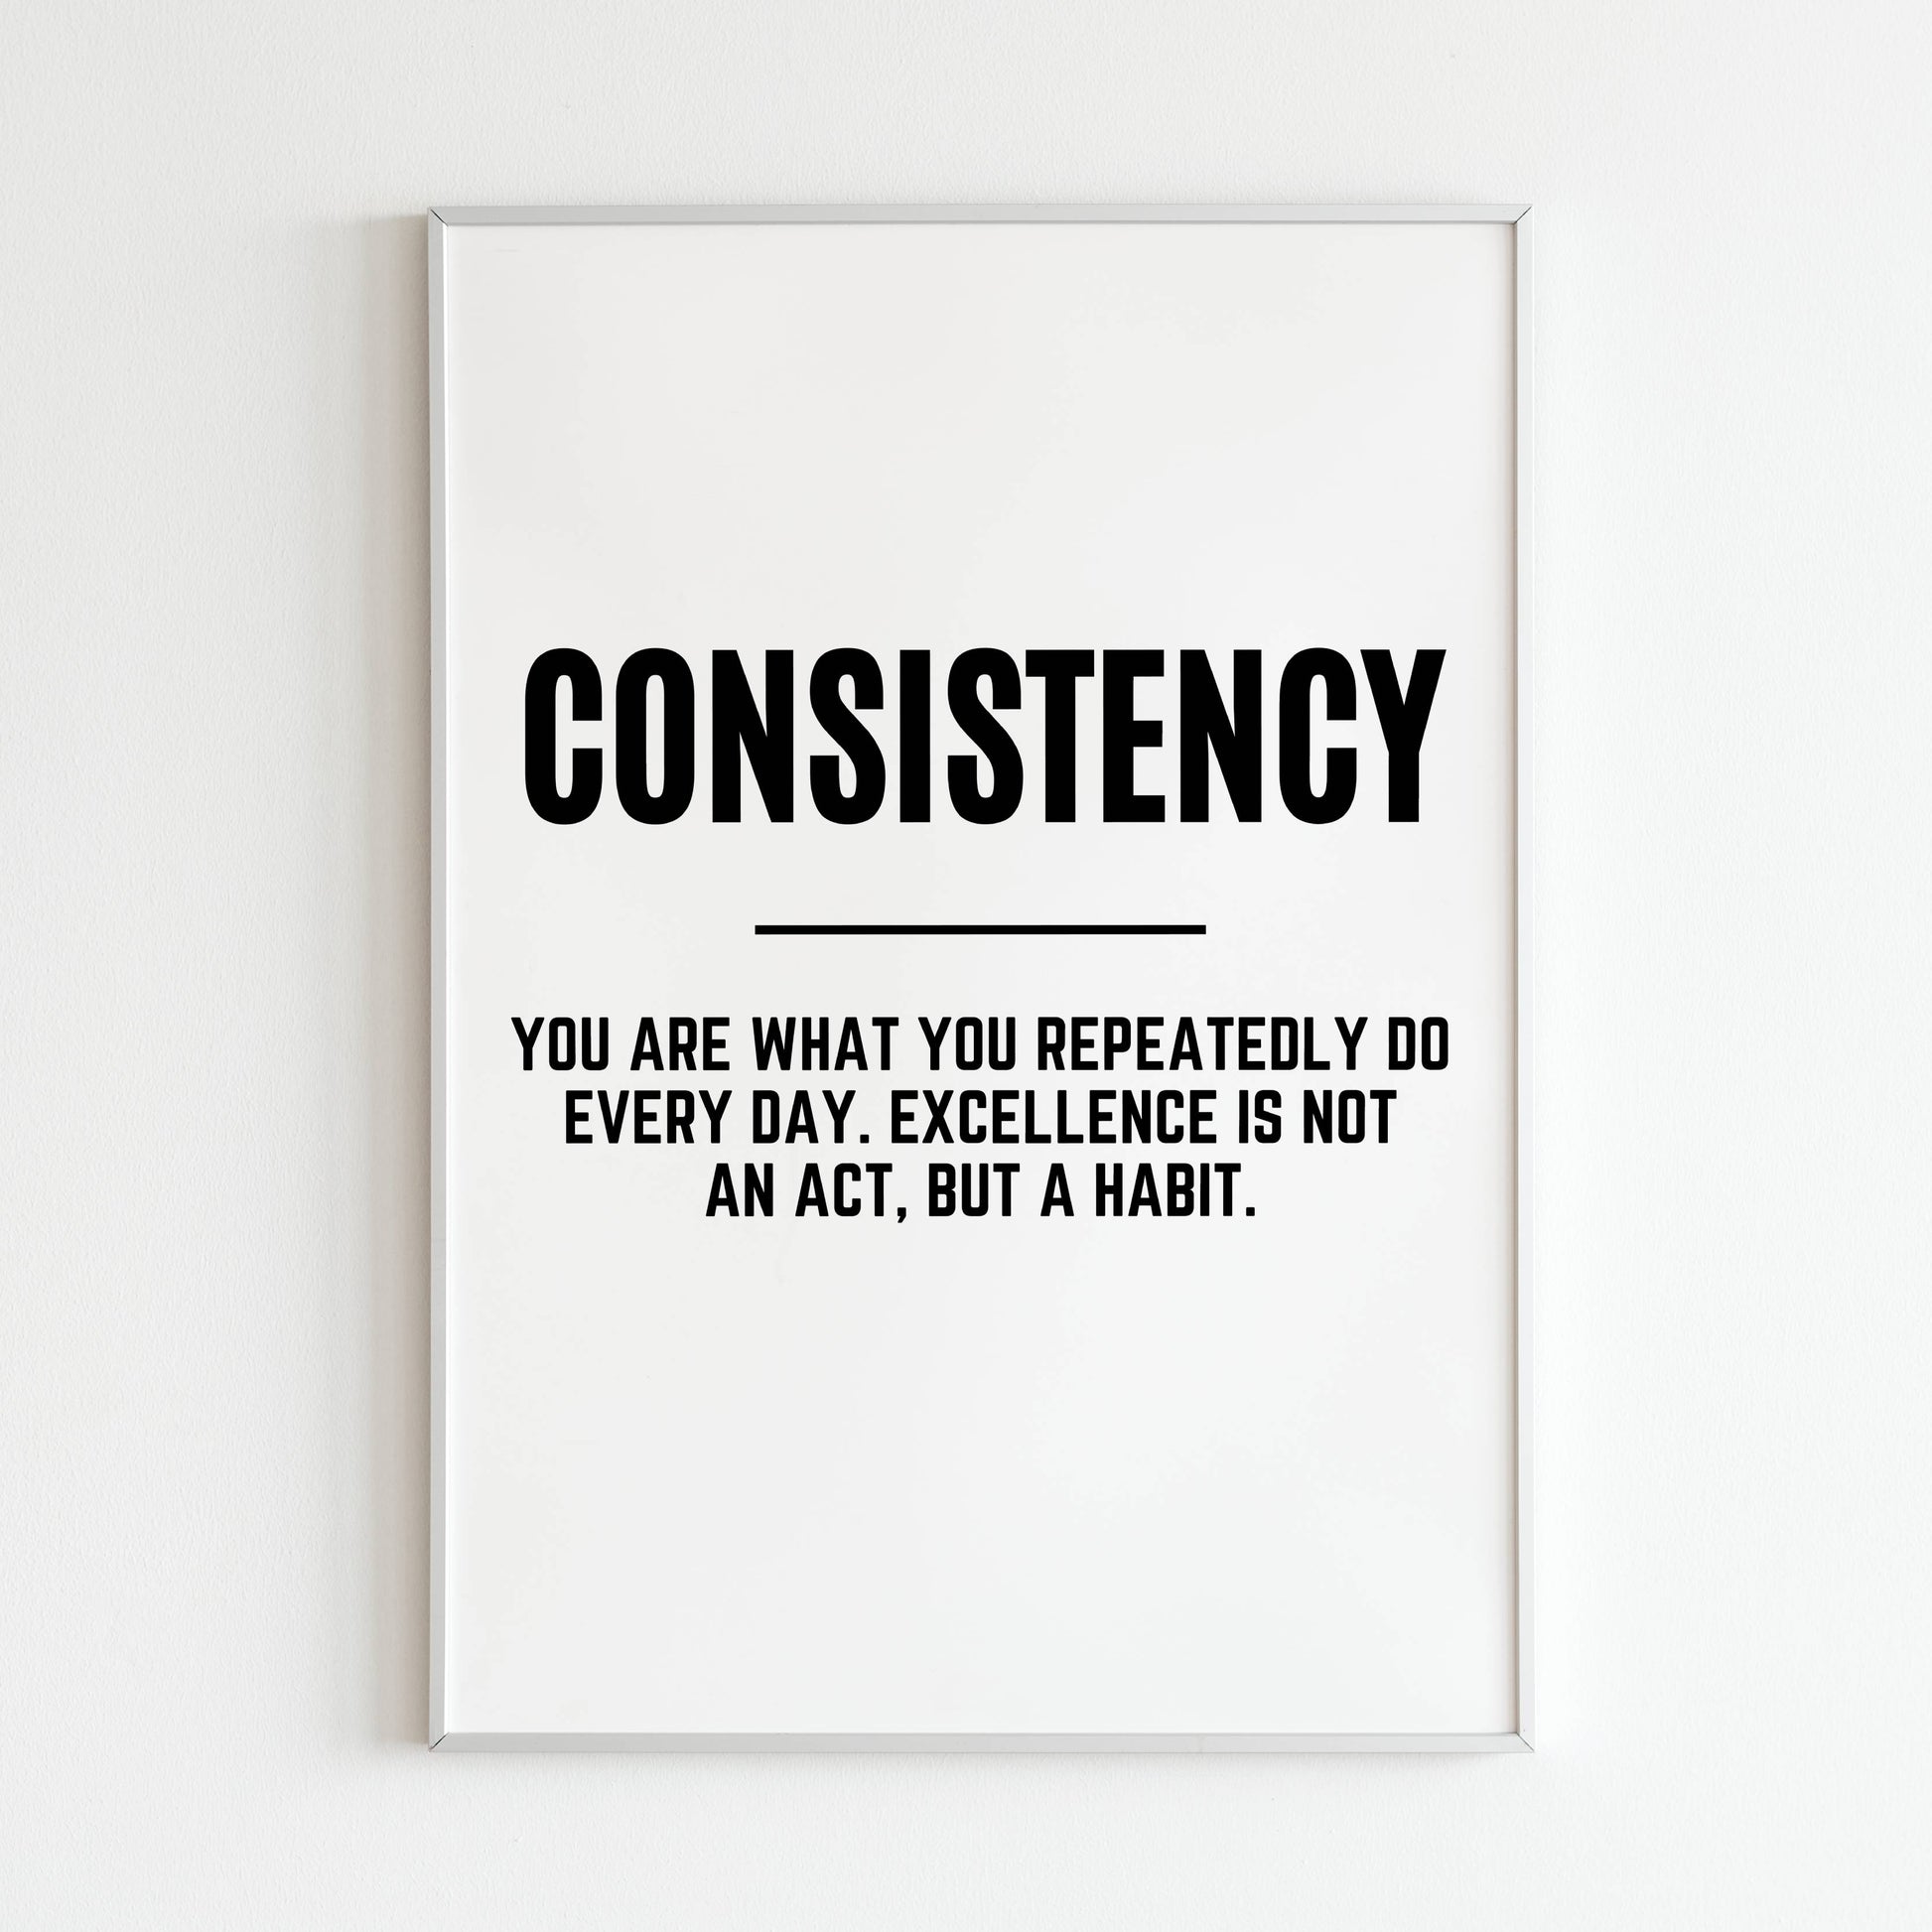 Printable perseverance poster - Minimalist typography art with a message of consistent action.